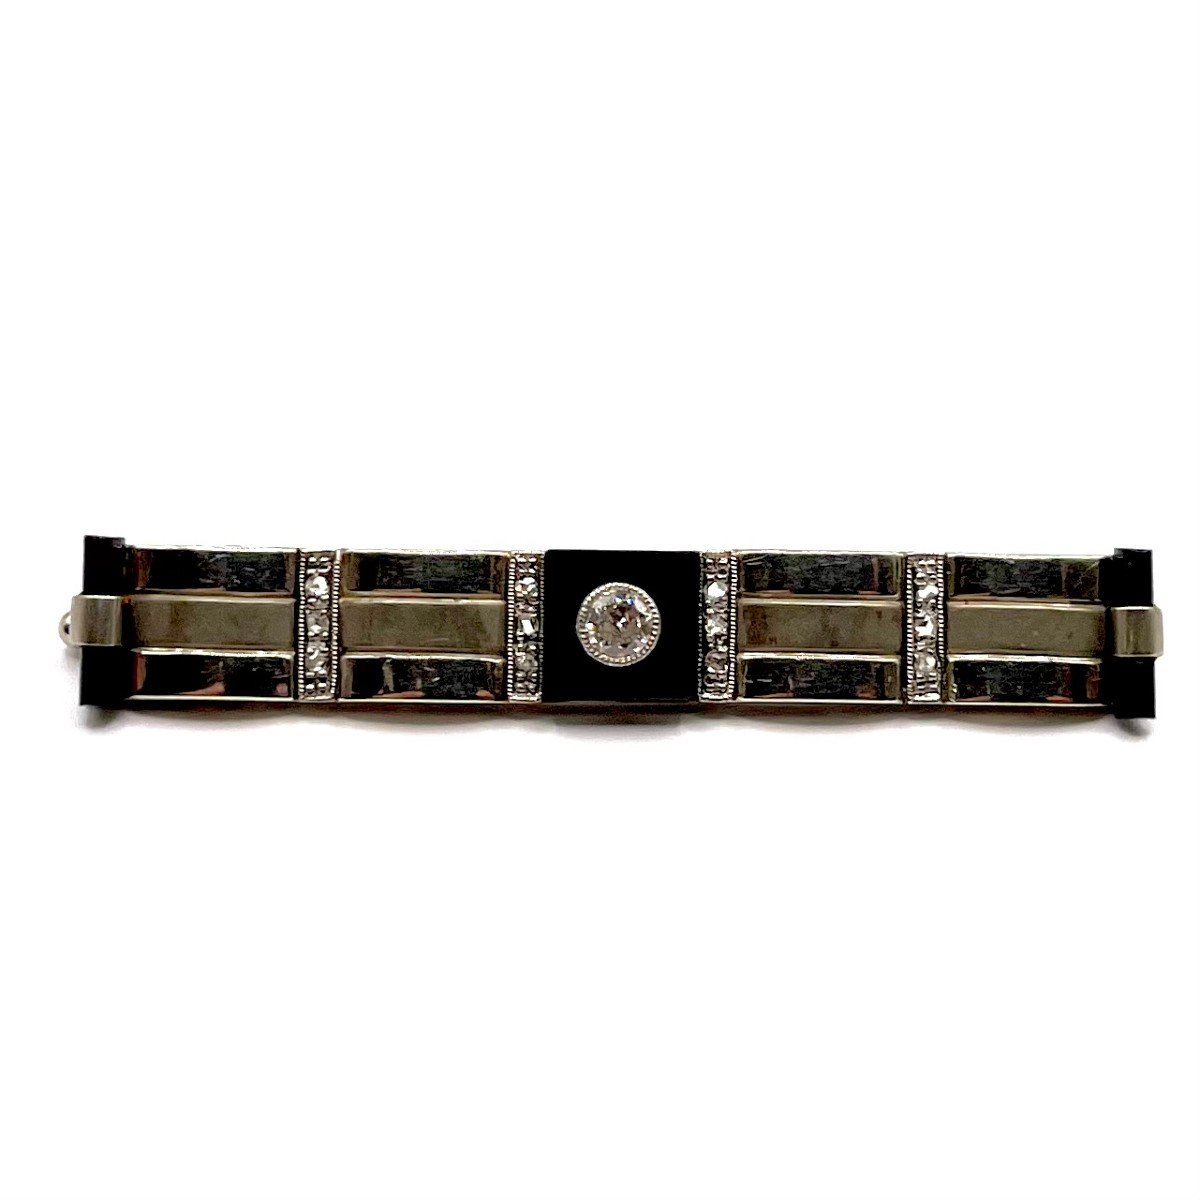 0220. Art Deco Brooch In White Gold With Diamonds And Onyx